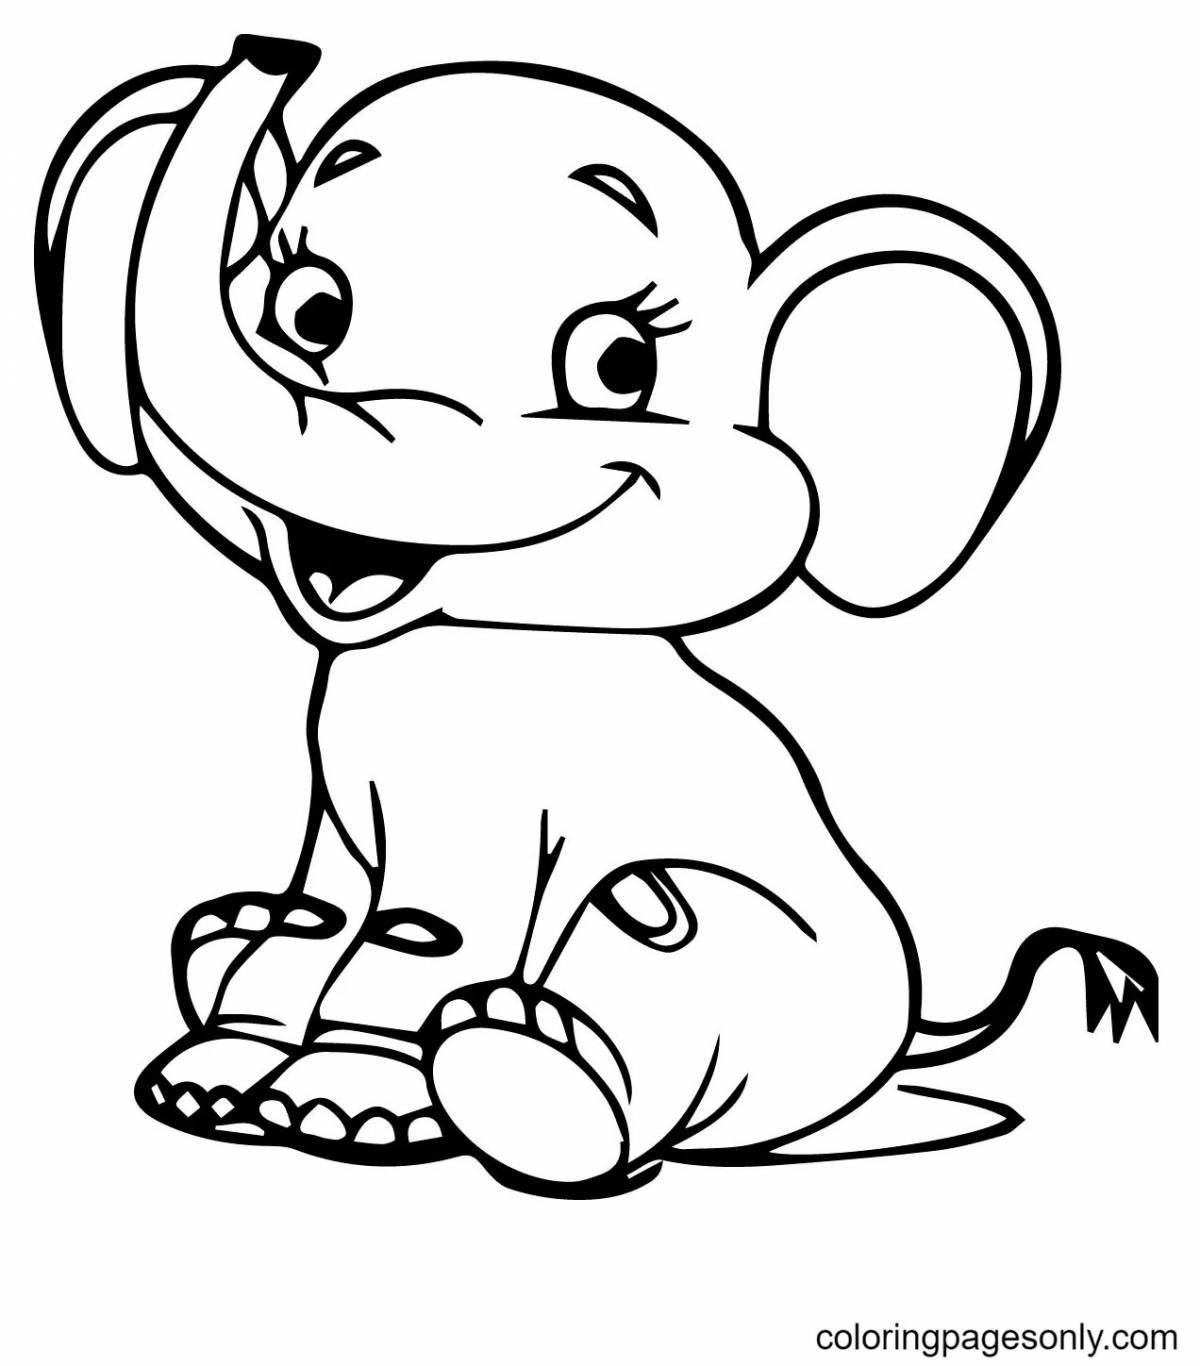 Radiant coloring page elephant